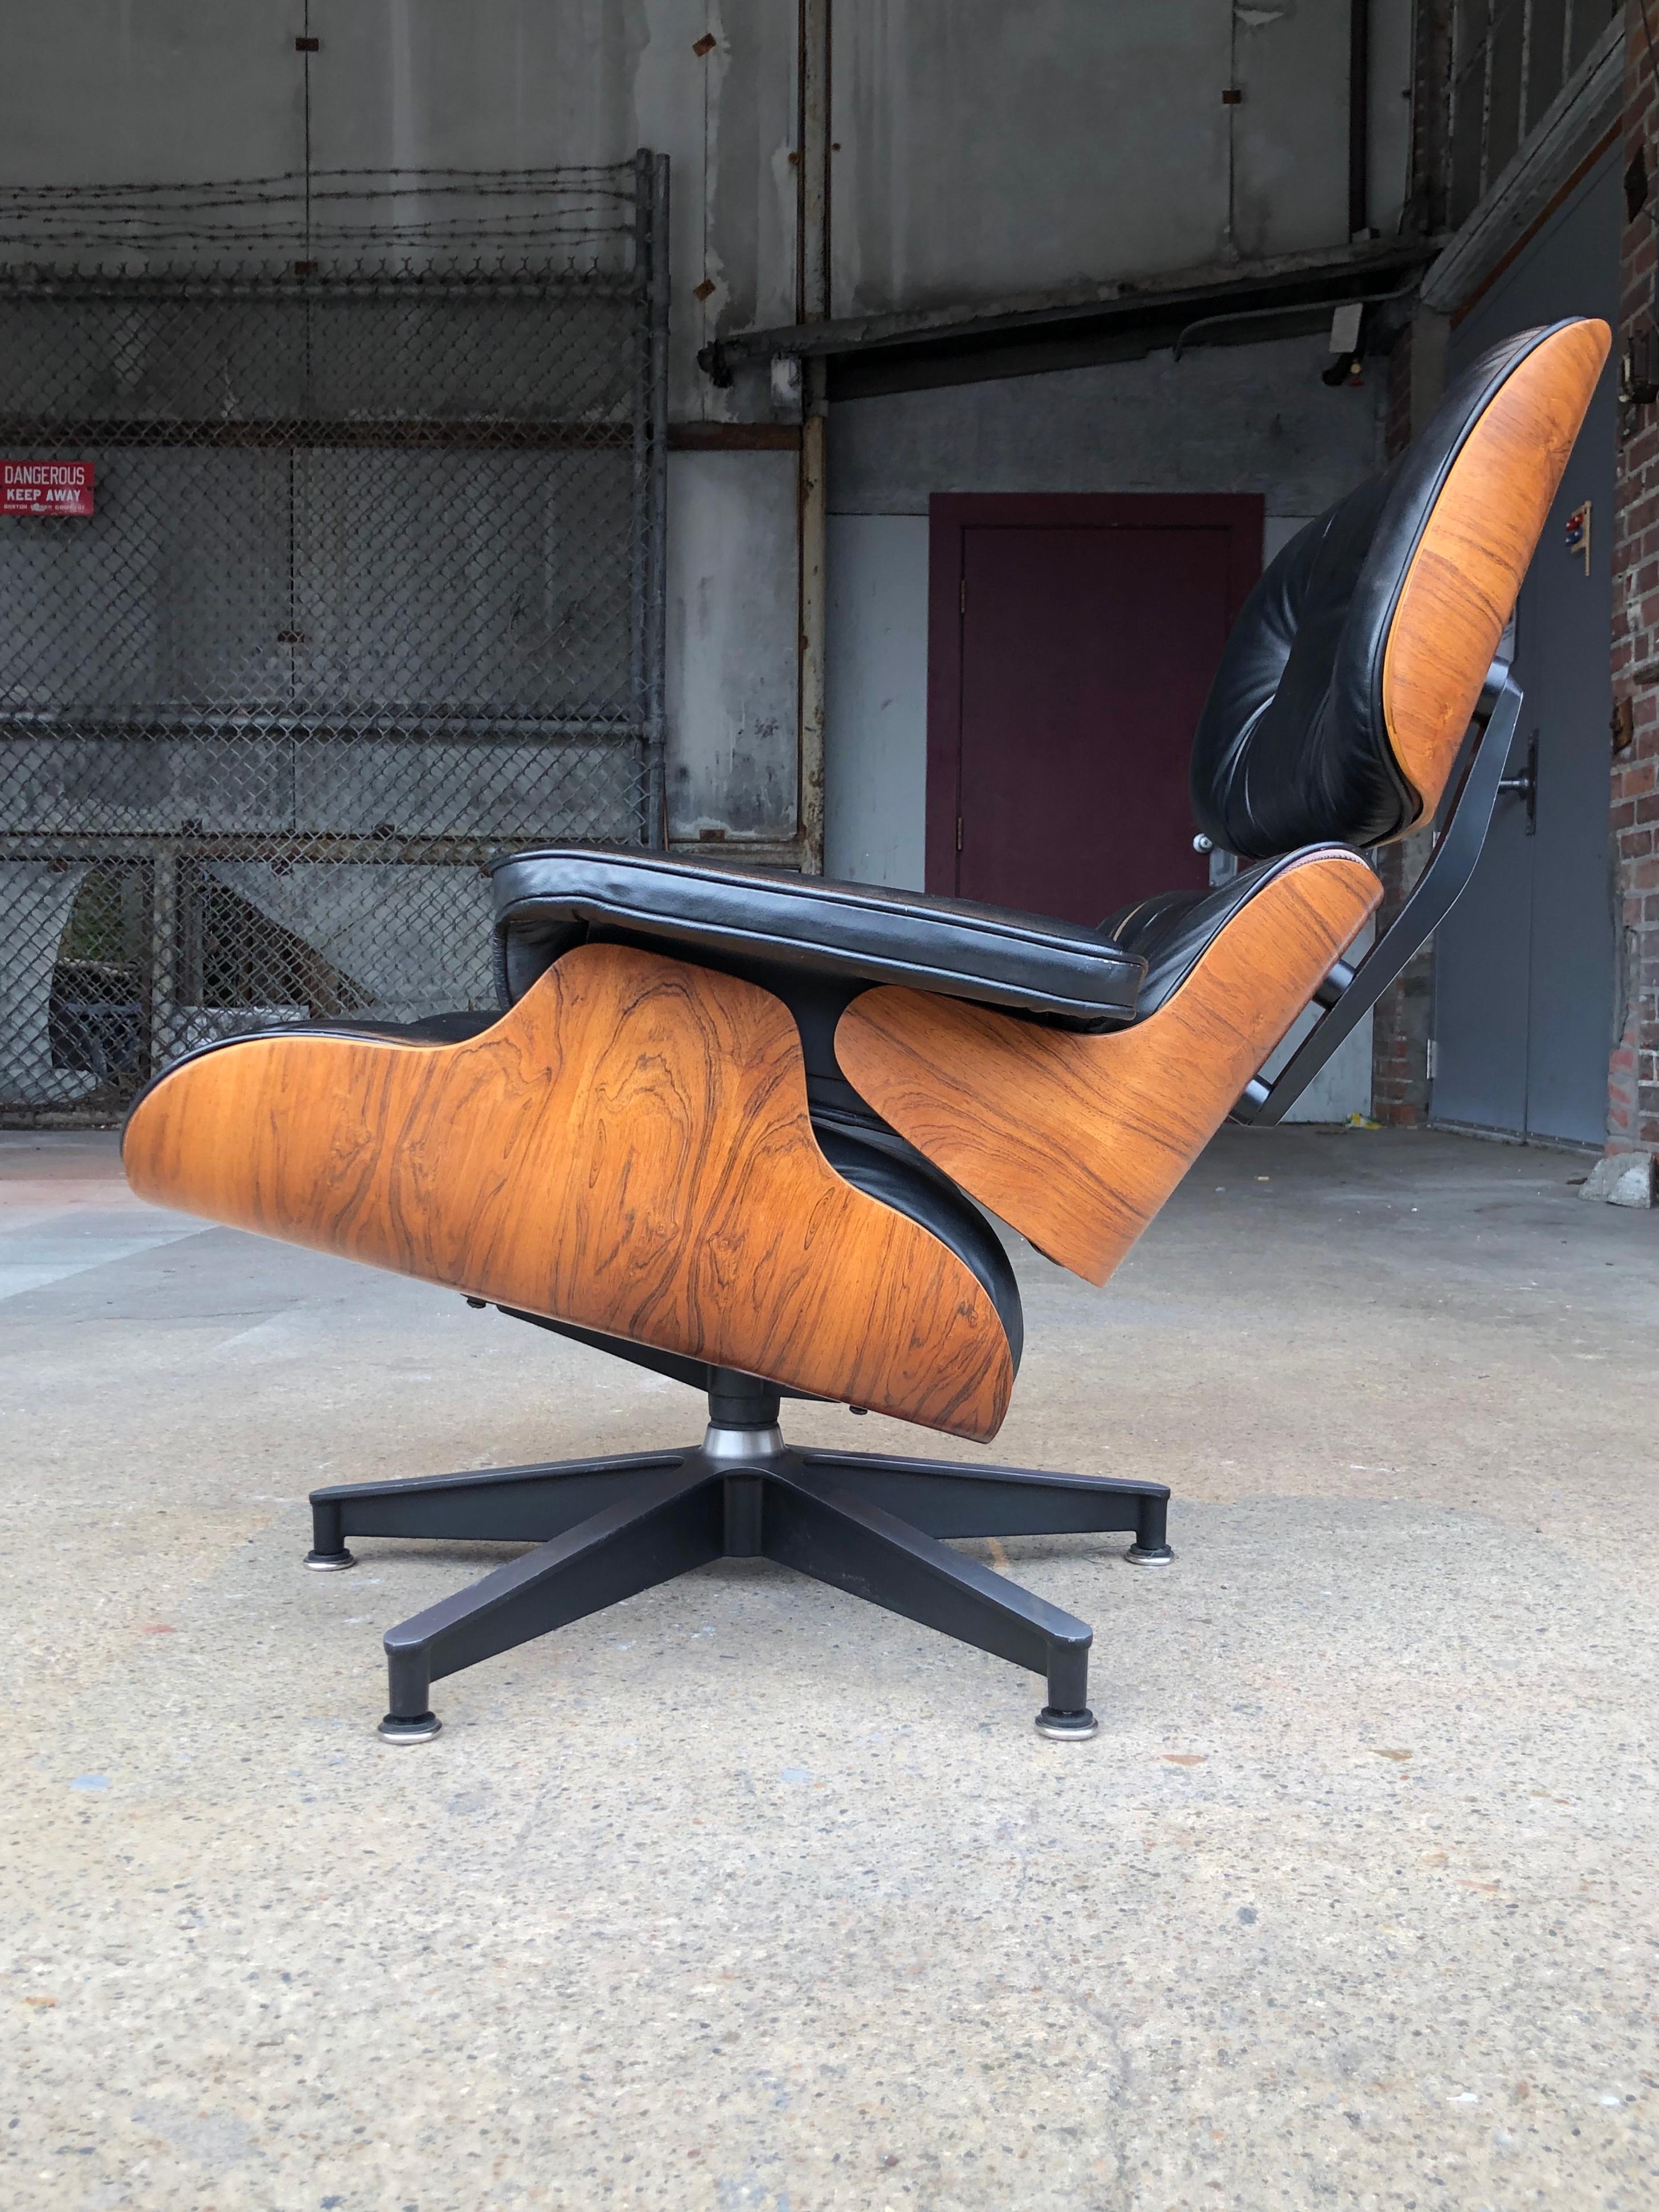 Gorgeous rosewood Eames chair with black leather. In very good vintage condition. Leather has been cleaned and conditioned. Rosewood exterior shells have been freshly oiled to bring out the luster and grain detail. Signed with Herman Miller makes